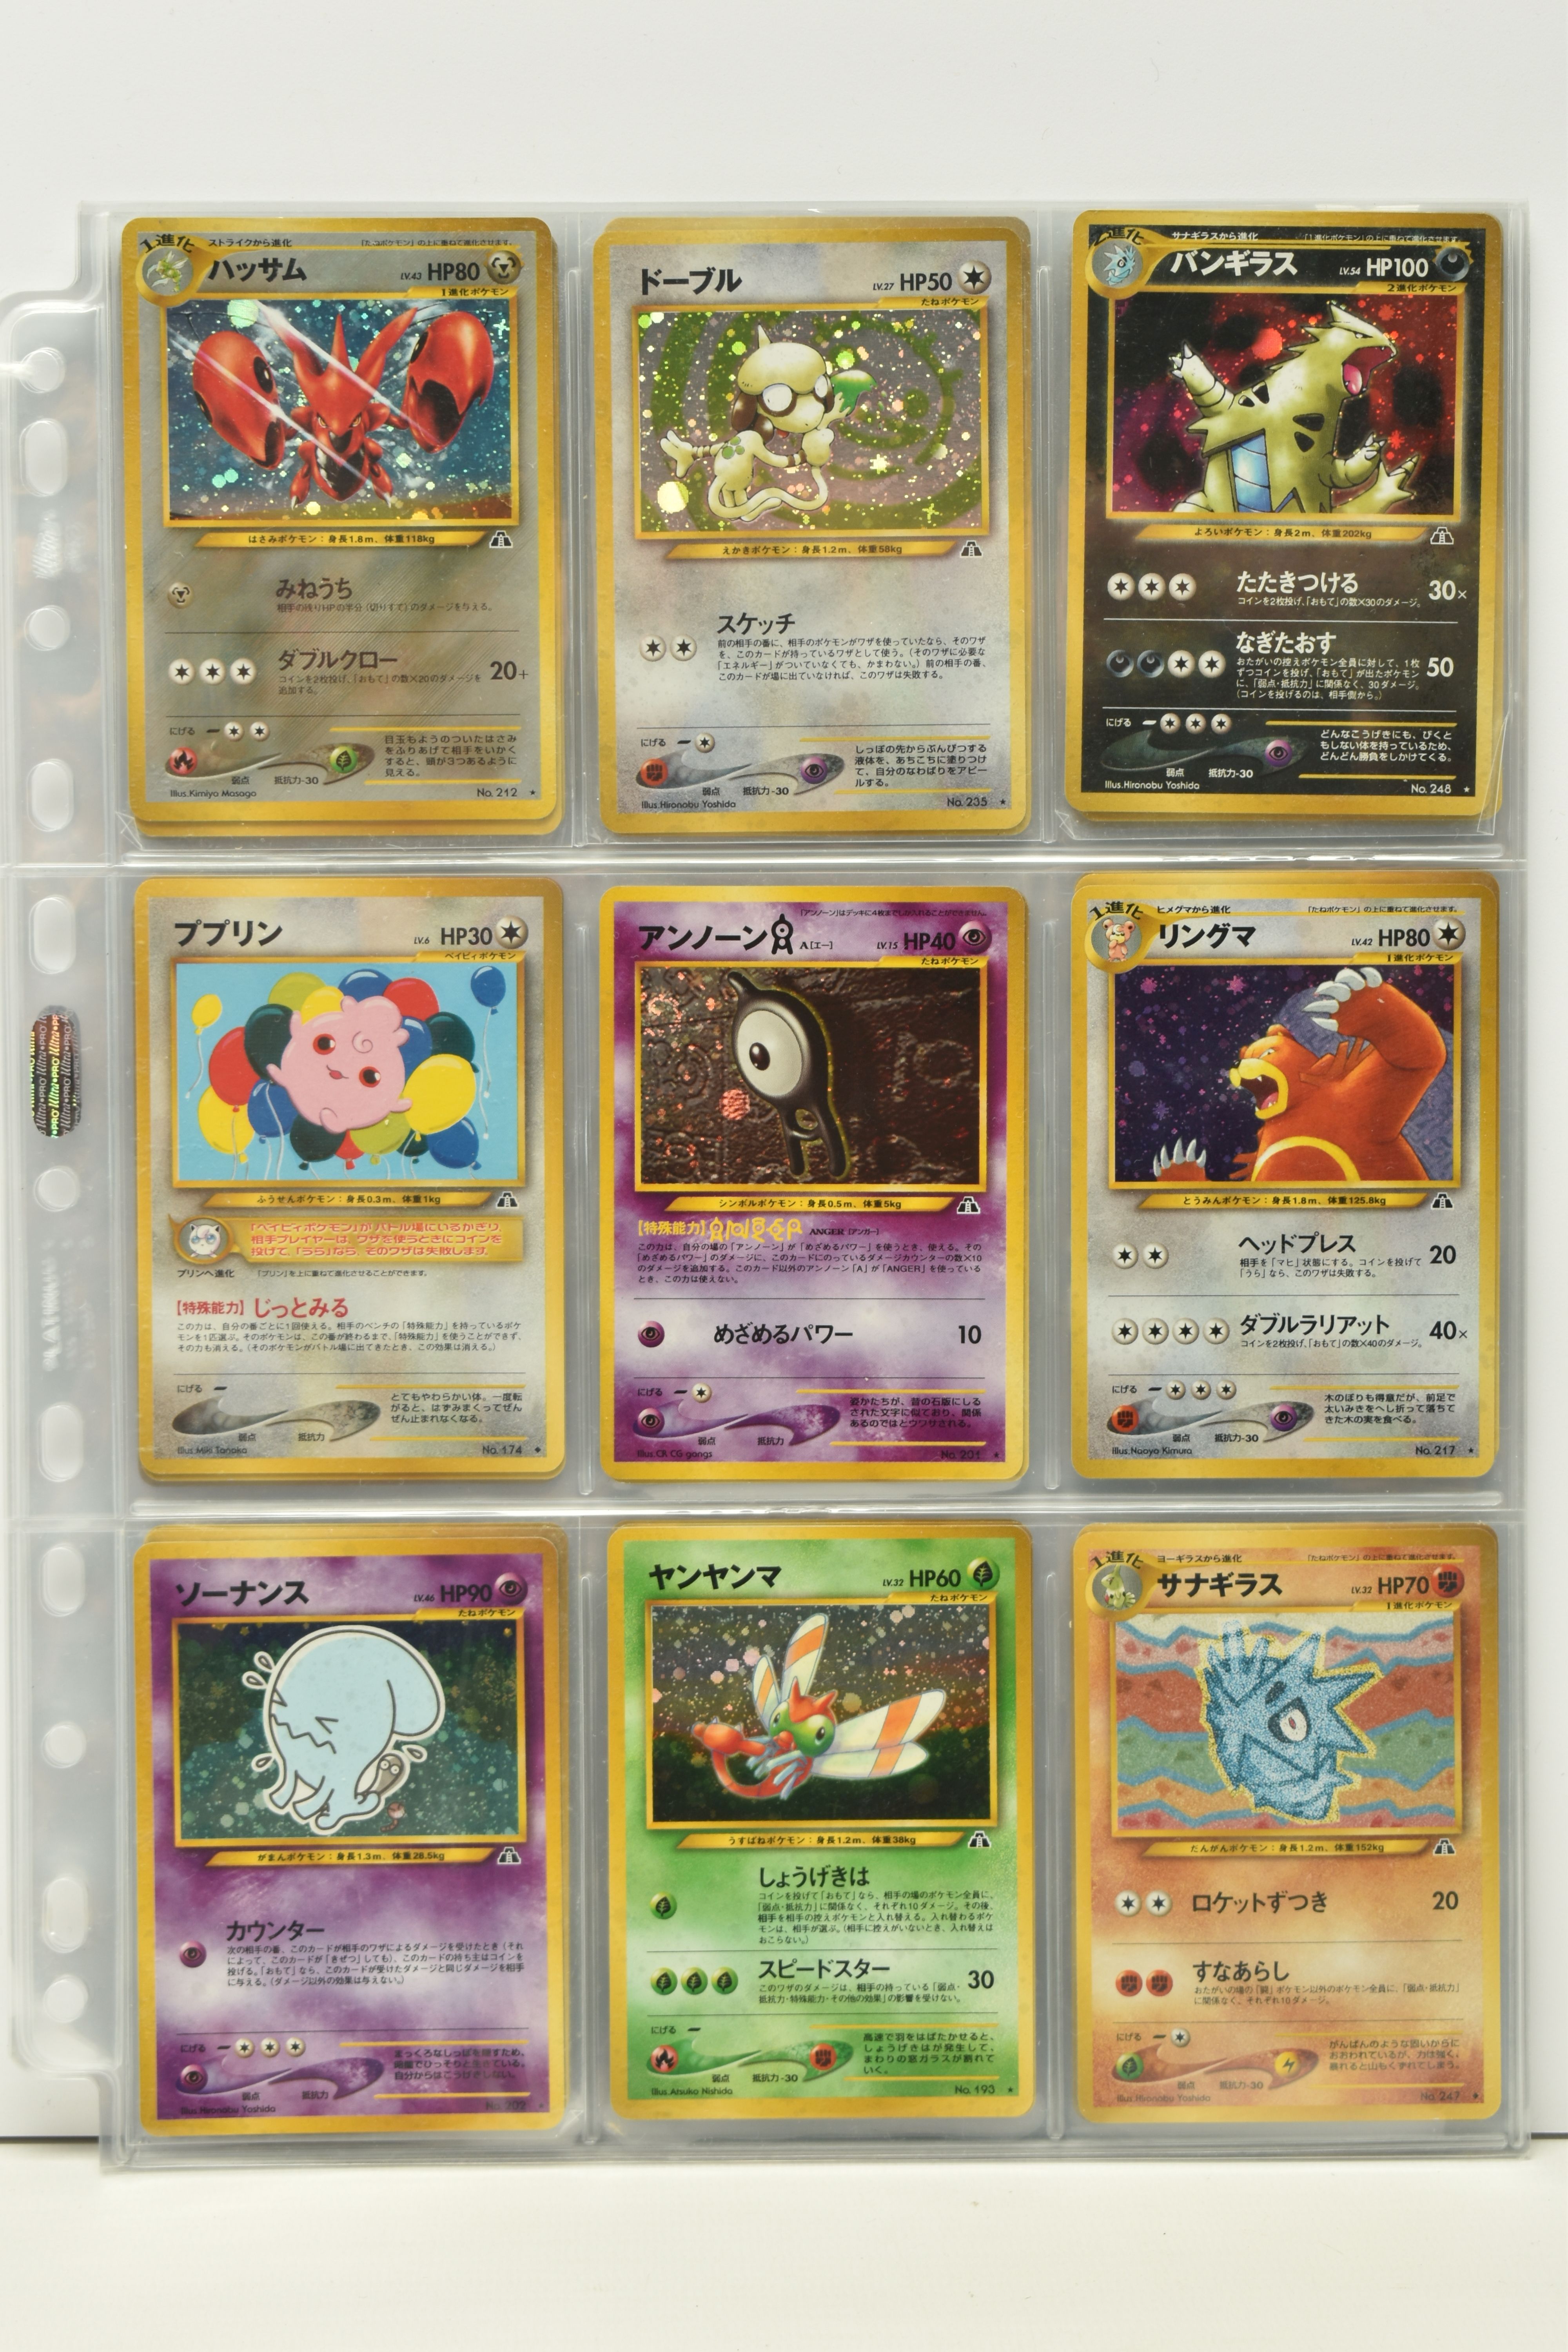 POKEMON JAPANESE NEO DISCOVERY COLECTION, contains most of the set including the holographic Espeon, - Image 2 of 7